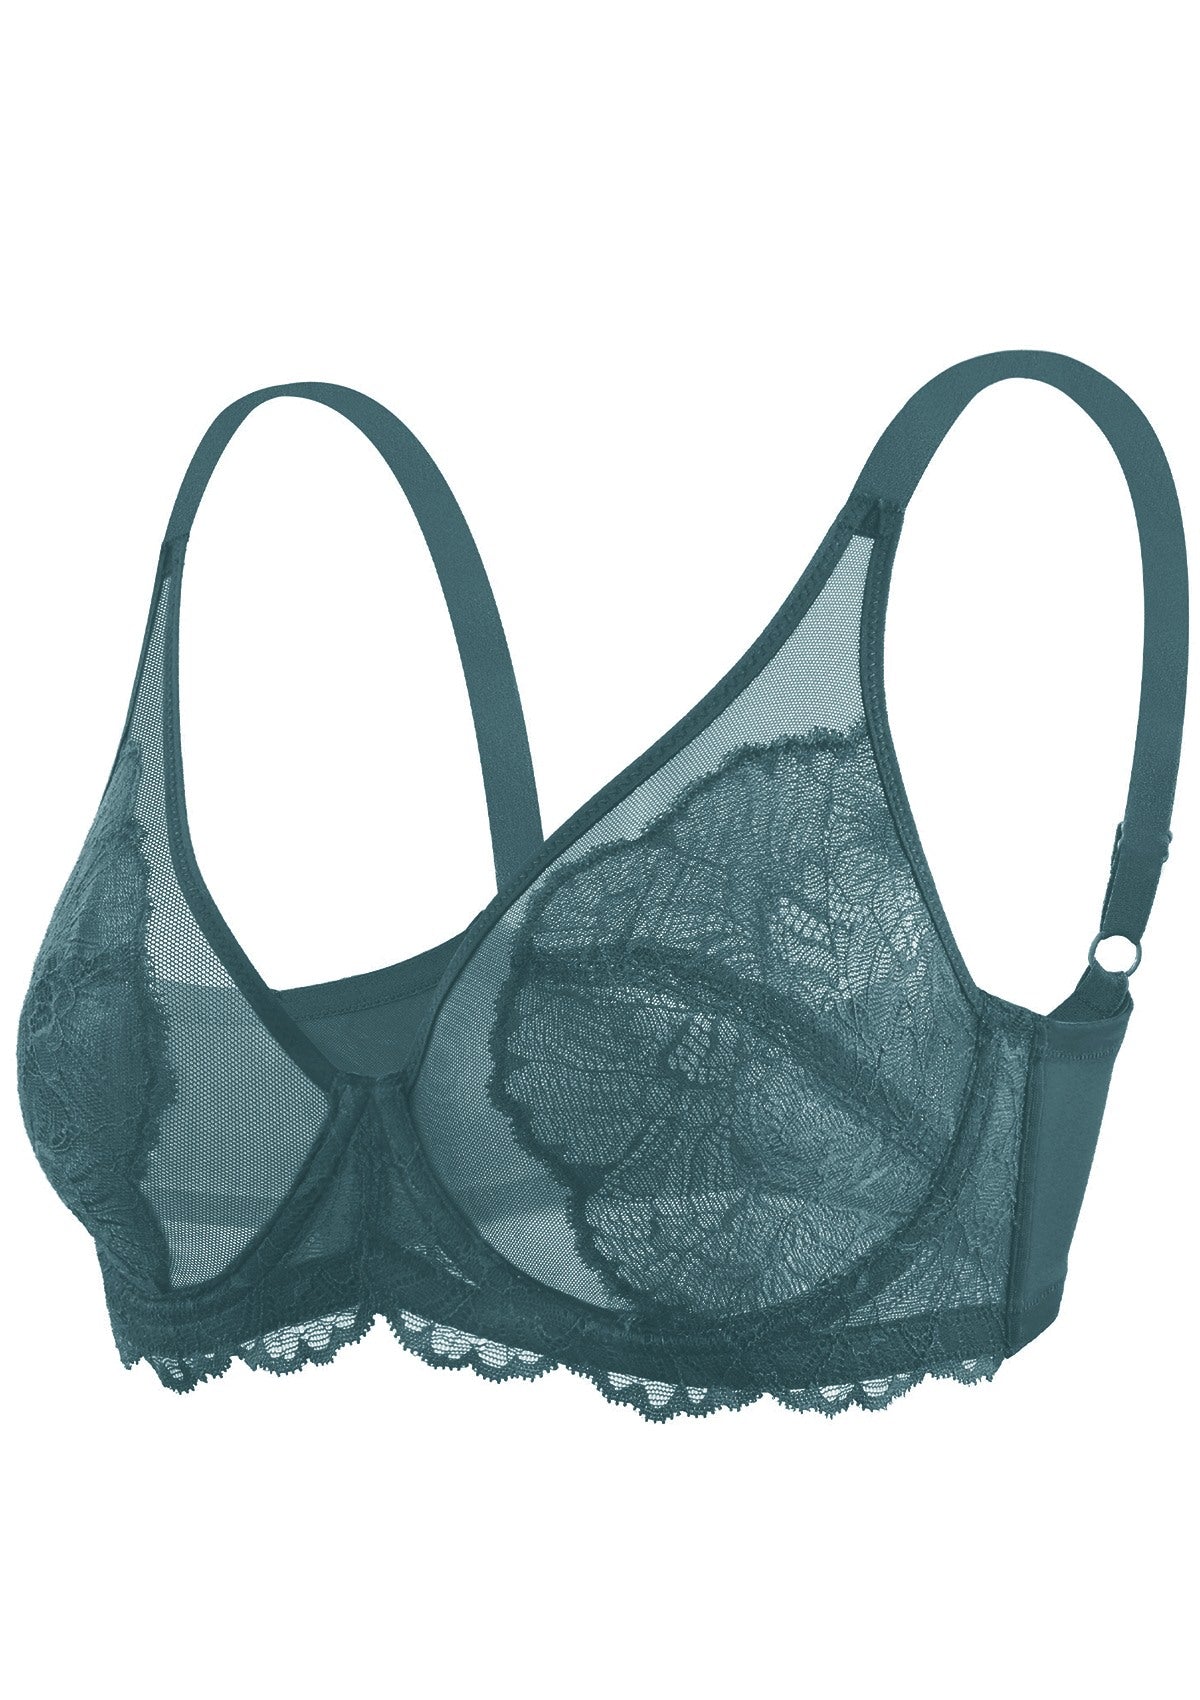 HSIA Blossom Full Figure See-Through Lace Bra For Side And Back Fat - Balsam Blue / 36 / C